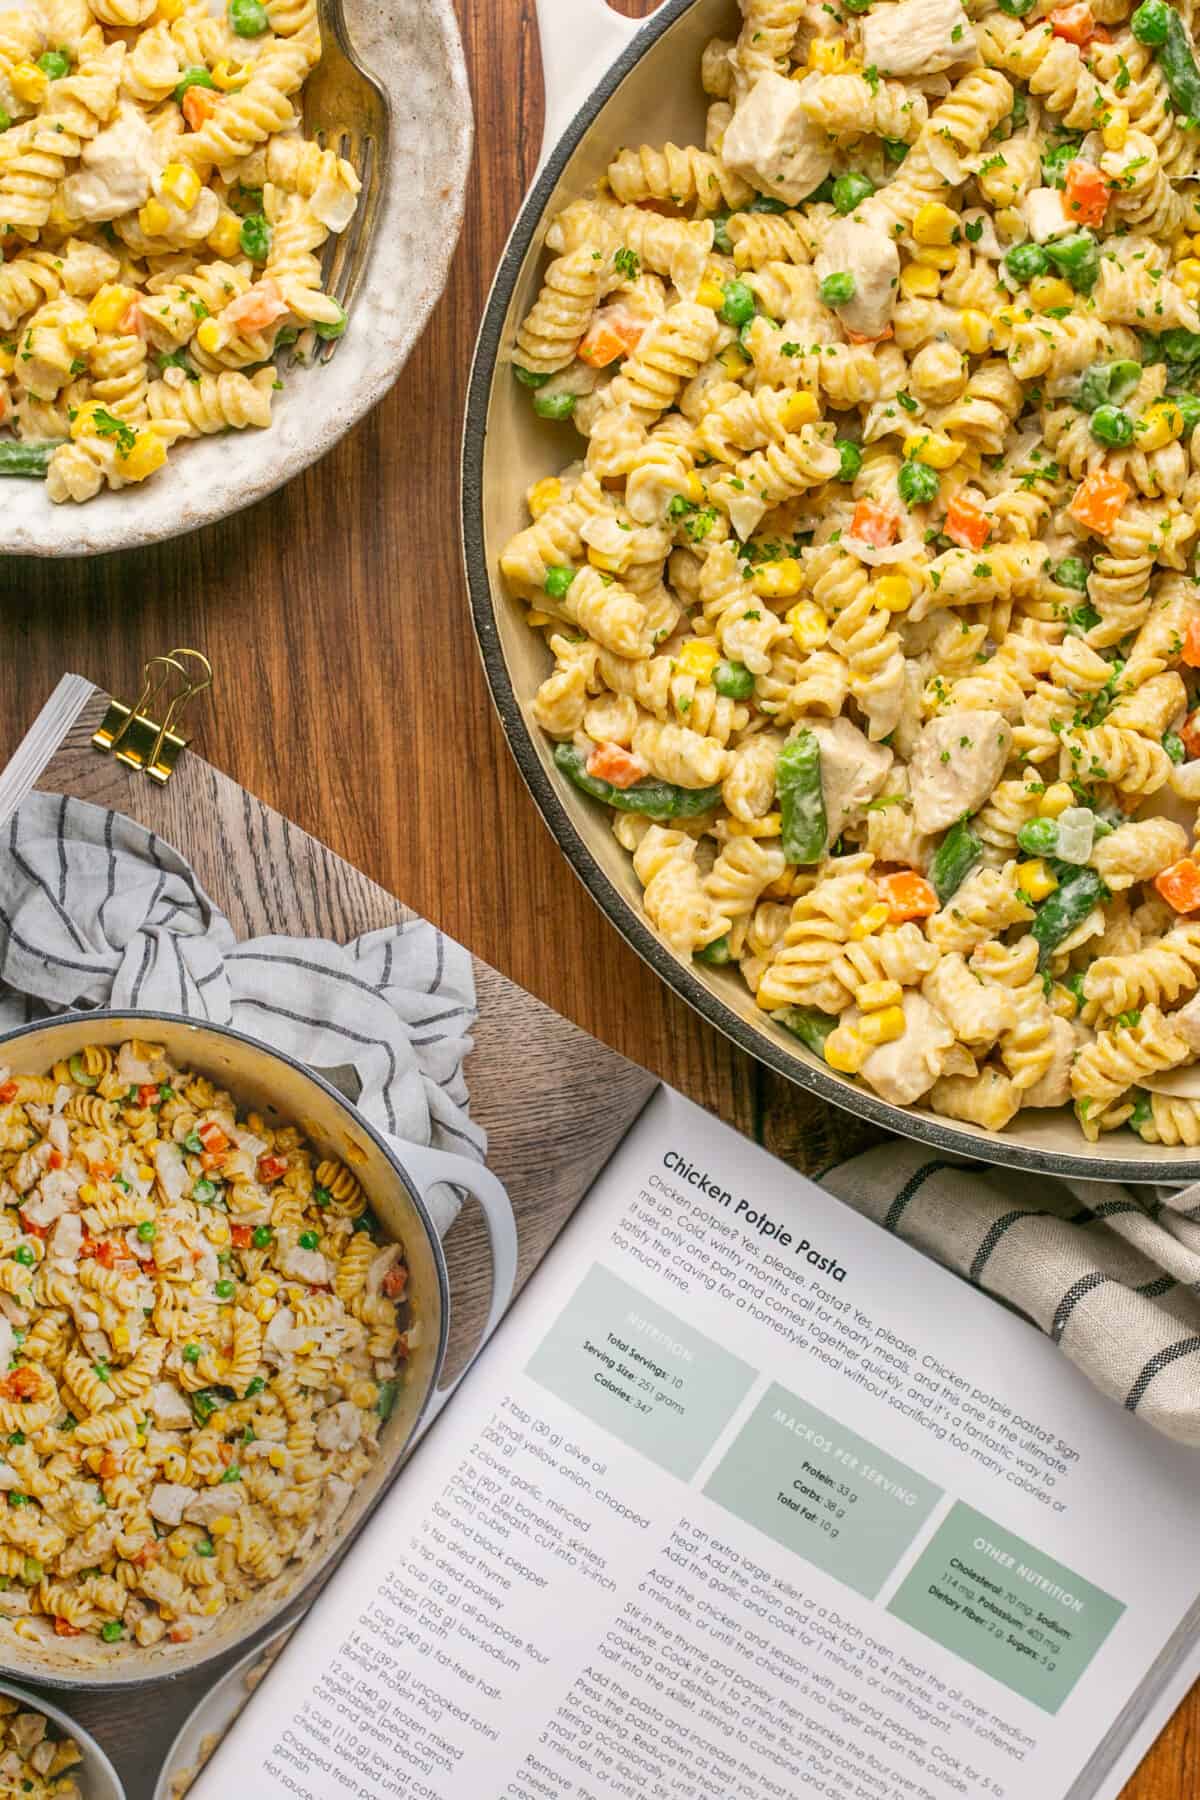 Chicken pot pie pasta in a large bowl with the cookbook next to it open to the recipe.